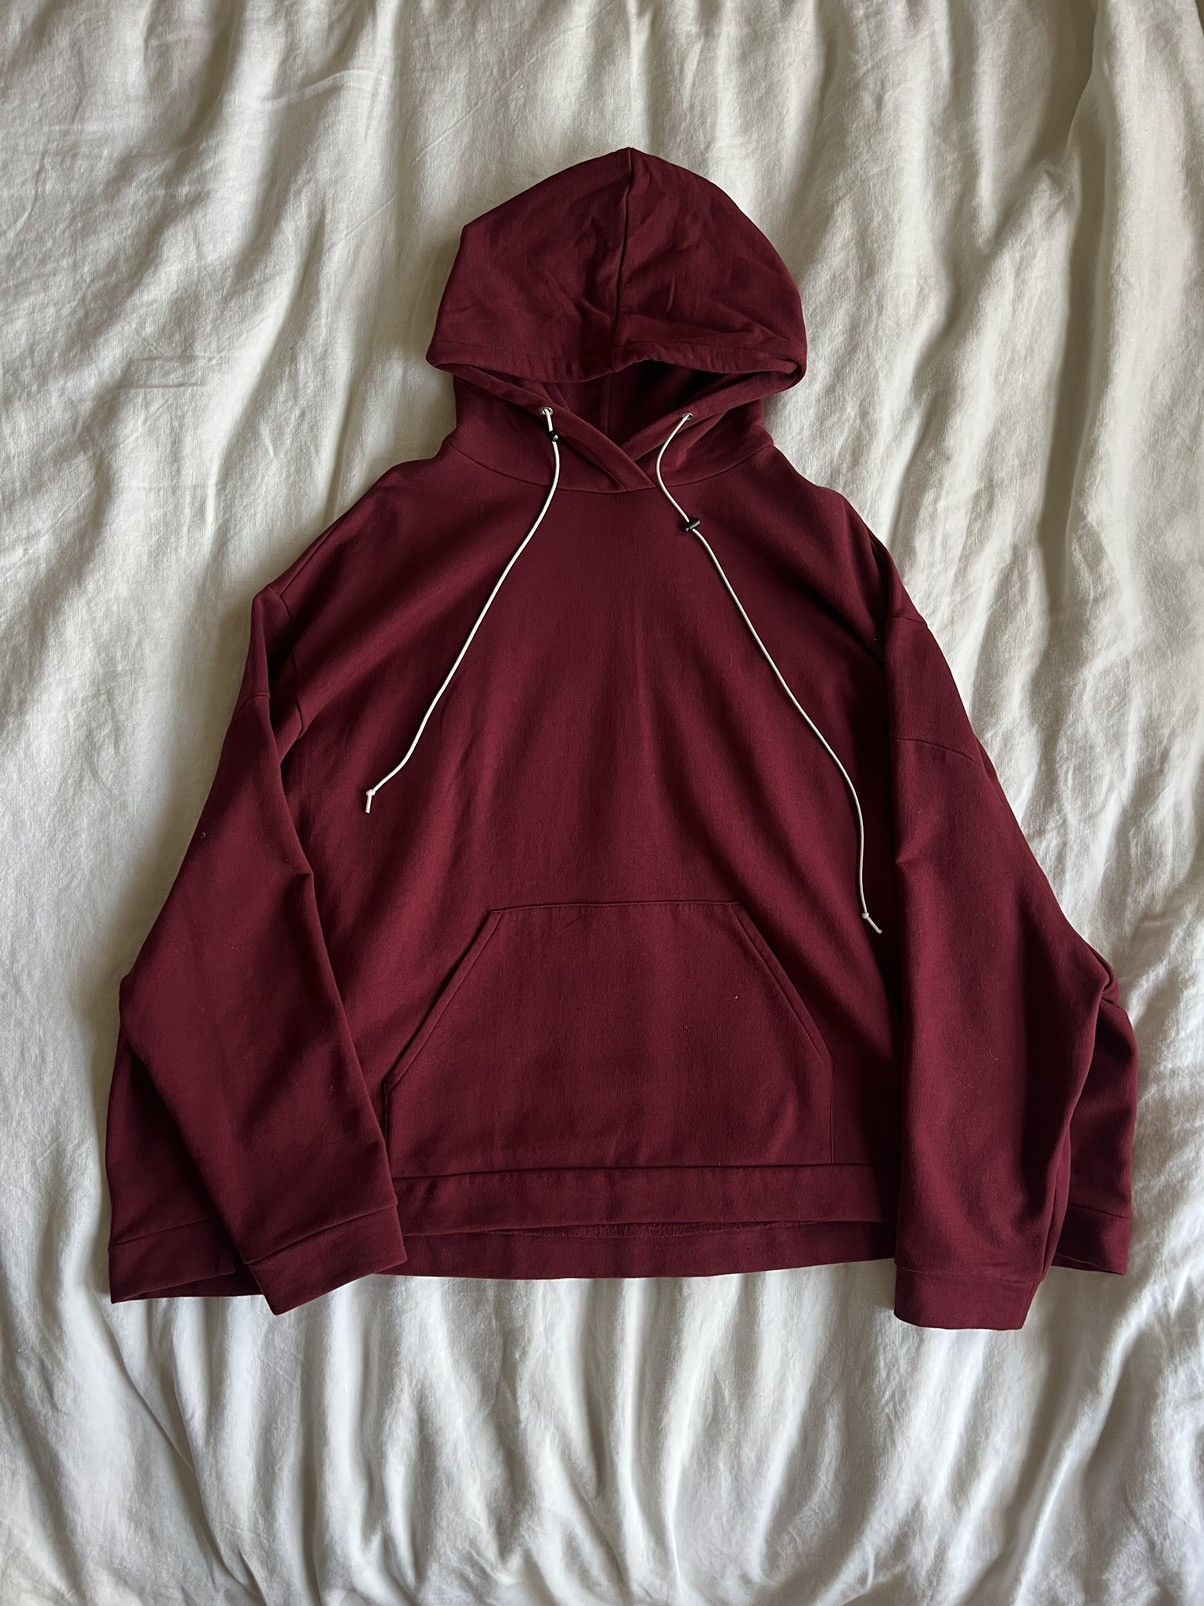 Camiel Fortgens Research Hoodie | Grailed